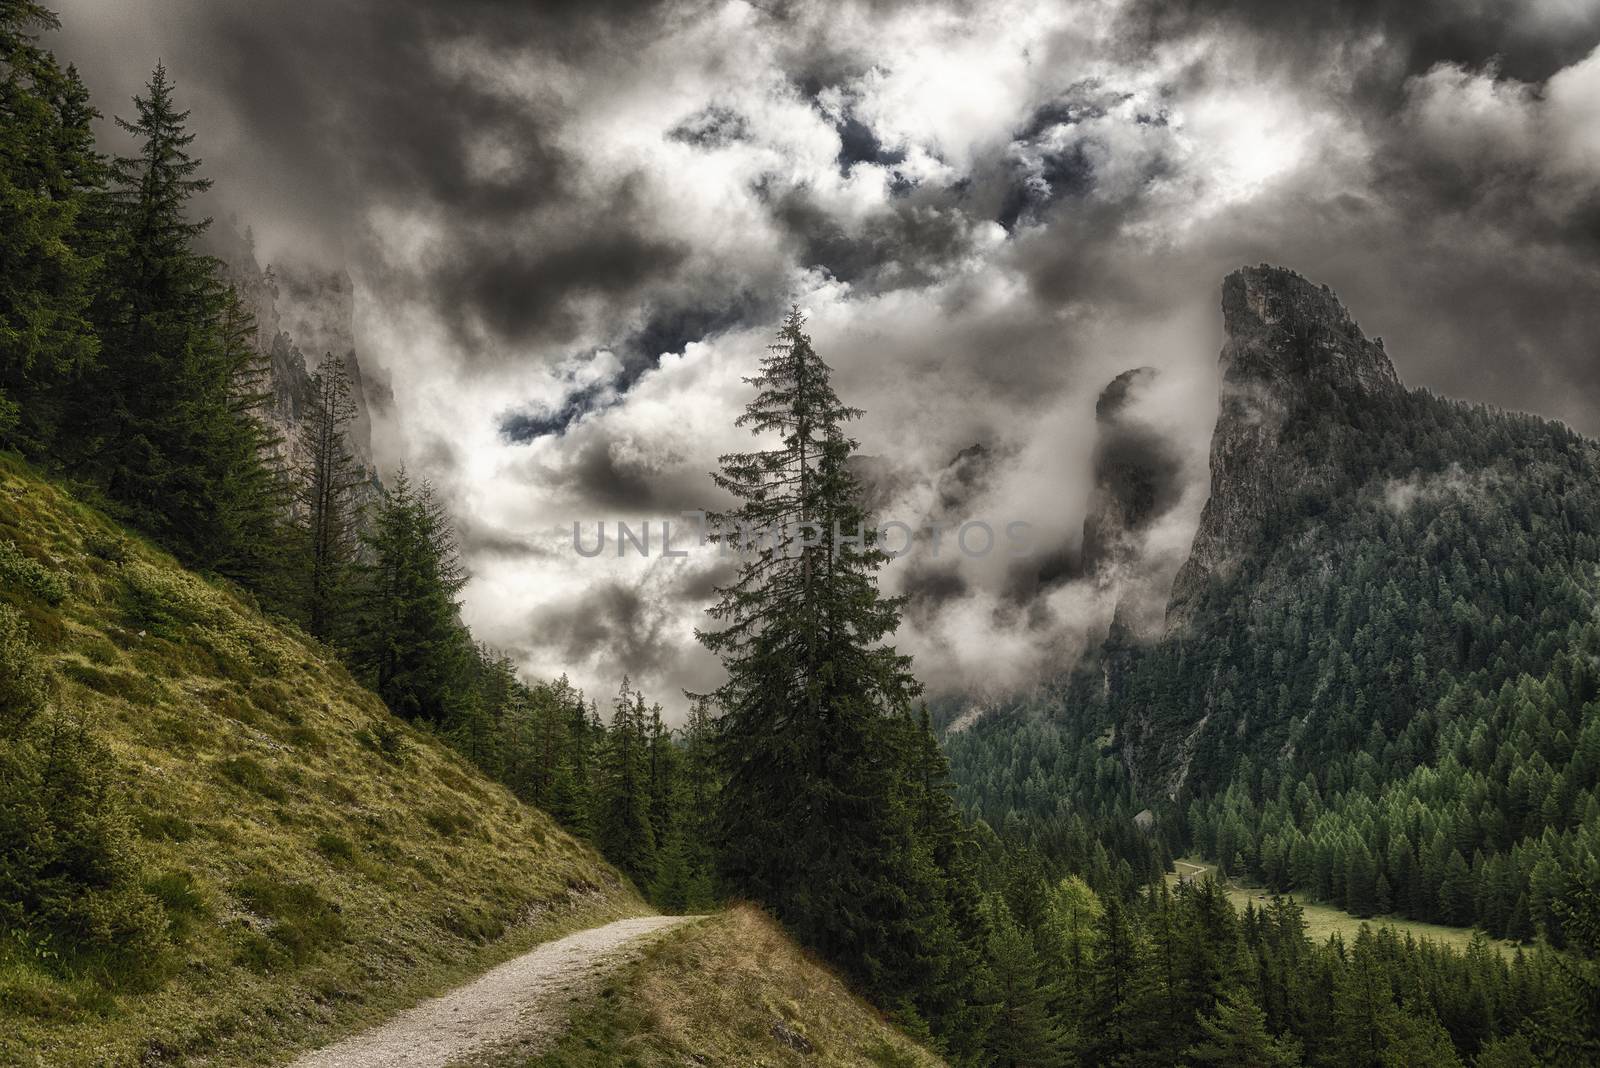 path through the forest with the top of the mountains wrapped in threatening clouds, Vallunga near the little city of Selva di Val Gardena - Trentino-Alto Adige